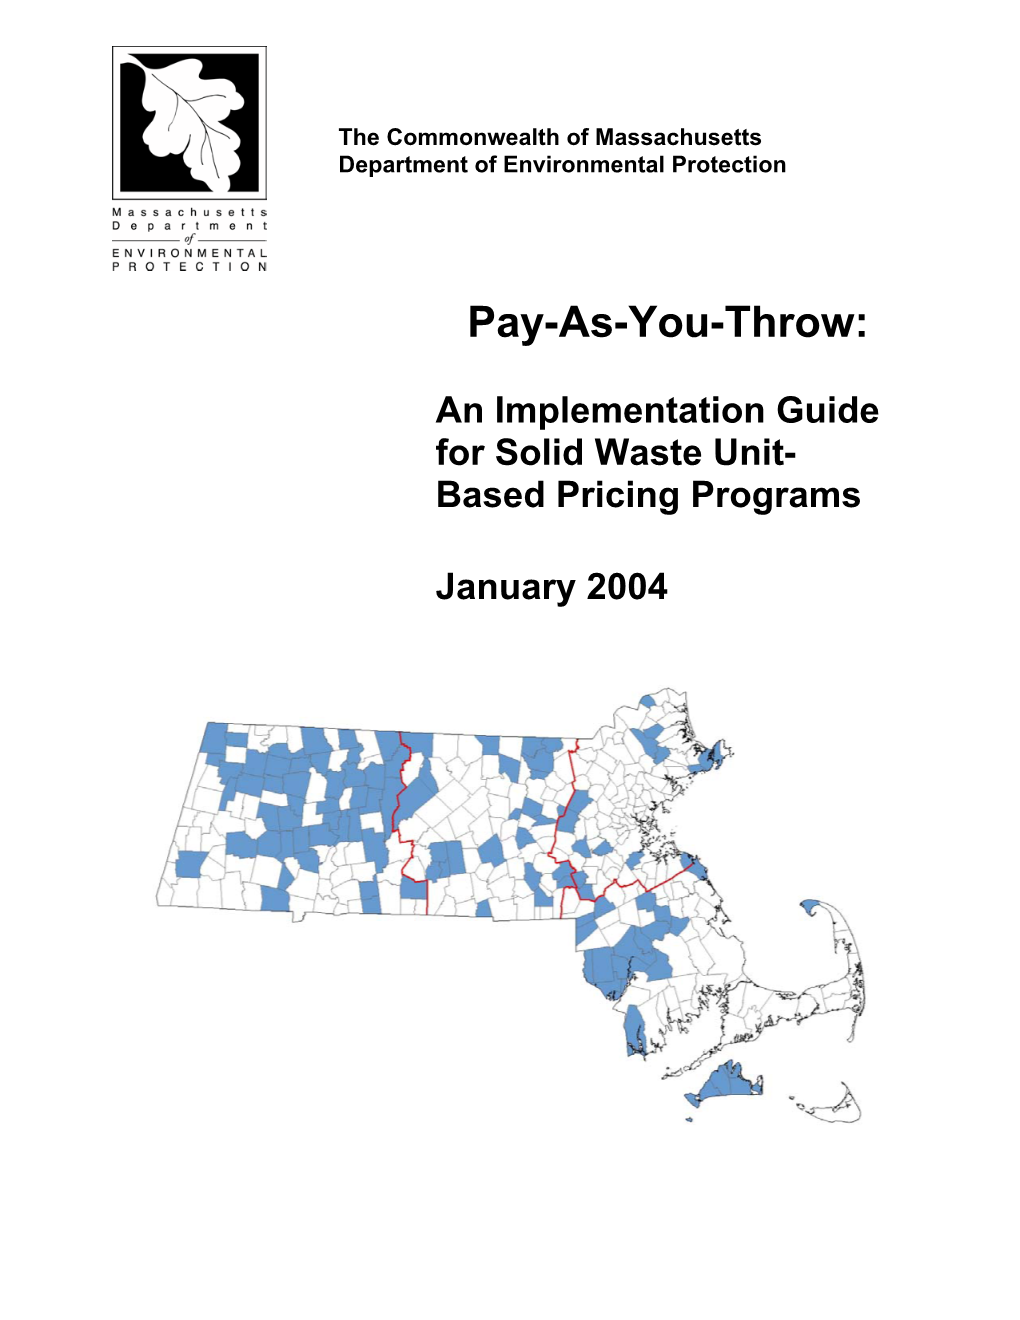 Pay-As-You-Throw: an Implementation Guide for Solid Waste Unit-Based Pricing Programs